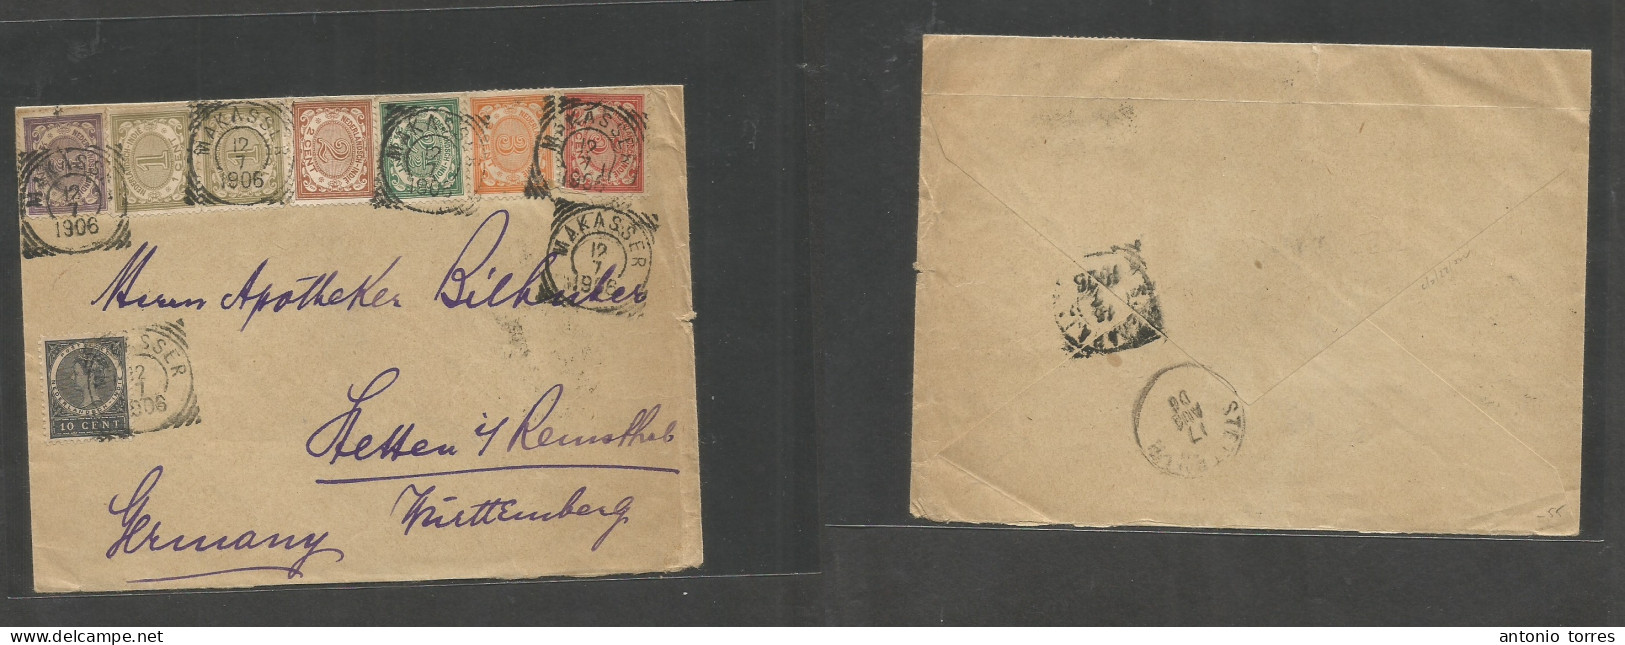 Dutch Indies. 1906 (12 July) Makasser - Germany, Hessen (17 Aug) Multicolor (8 Diff) Fkd Envelope, Tied Cds. VF. - India Holandeses